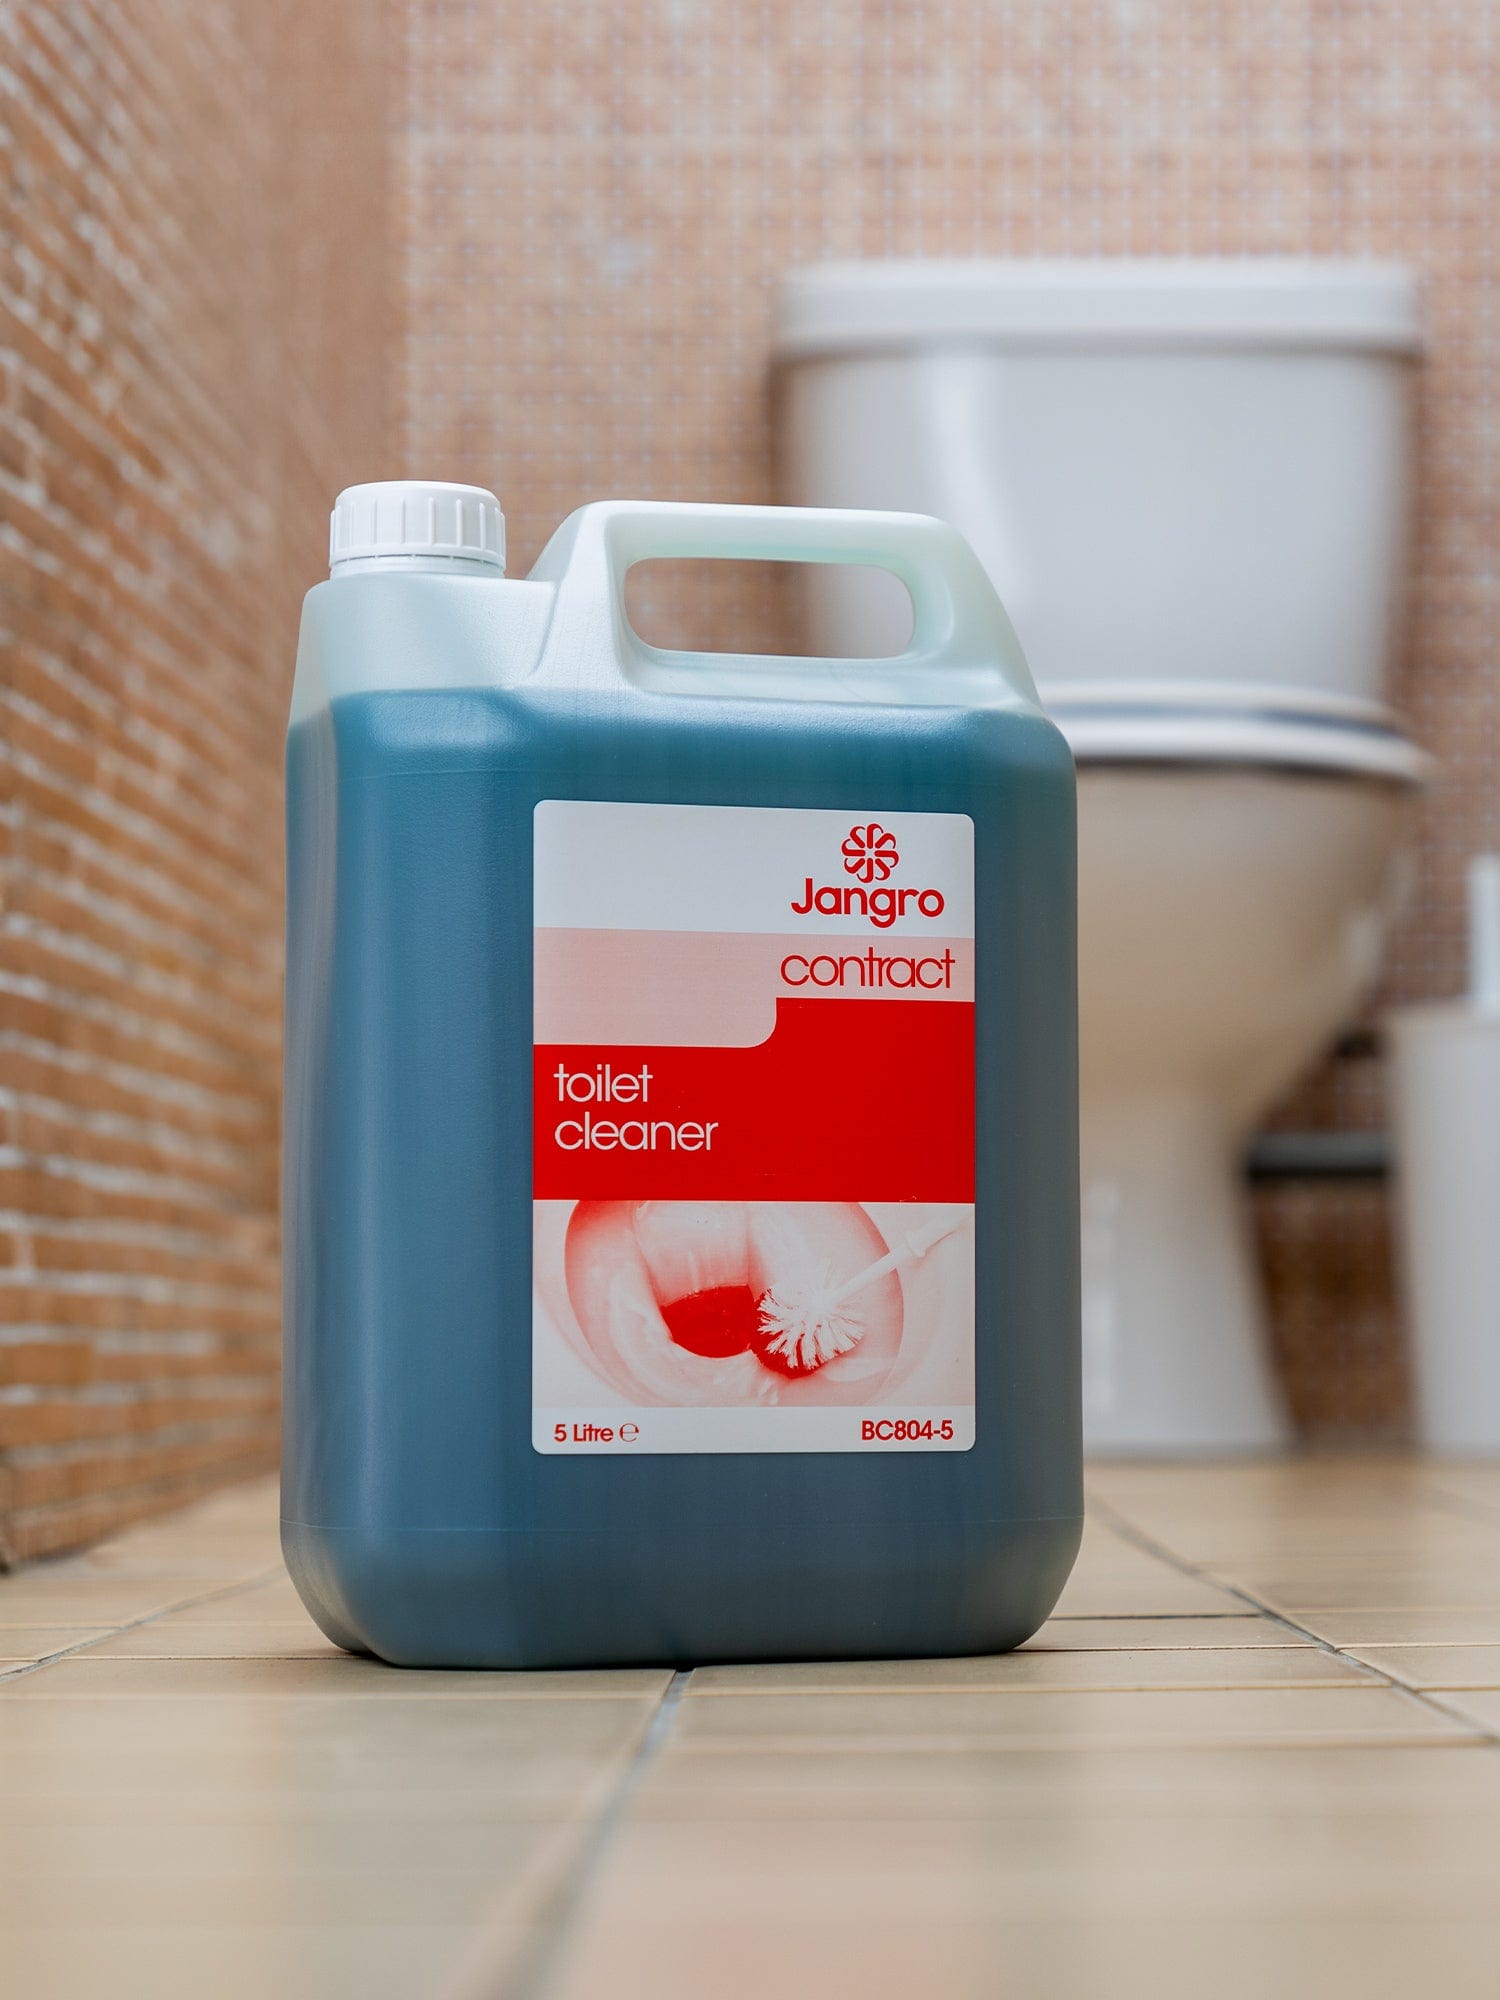 5 litre toilet cleaner contract